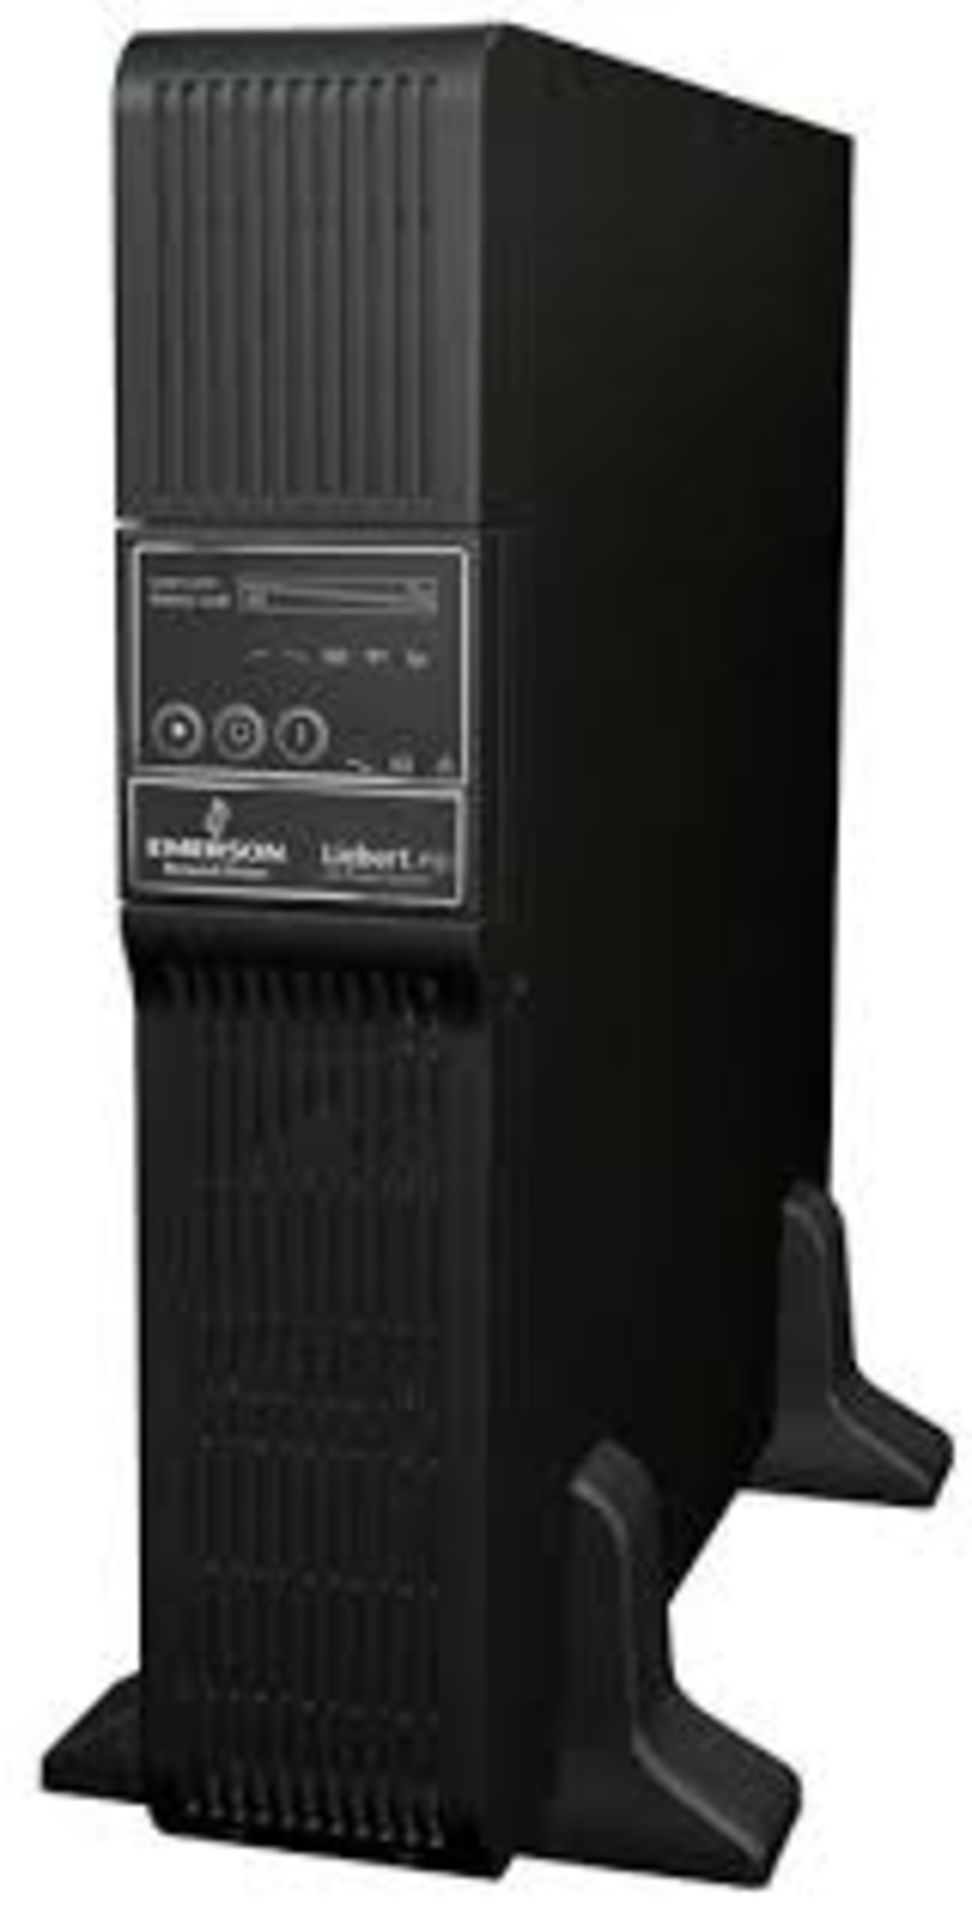 Boxed Emerson Liebert Ps 1500 RT3-230 Interactive UPS IT Networking System RRP£700.0 (Viewings And